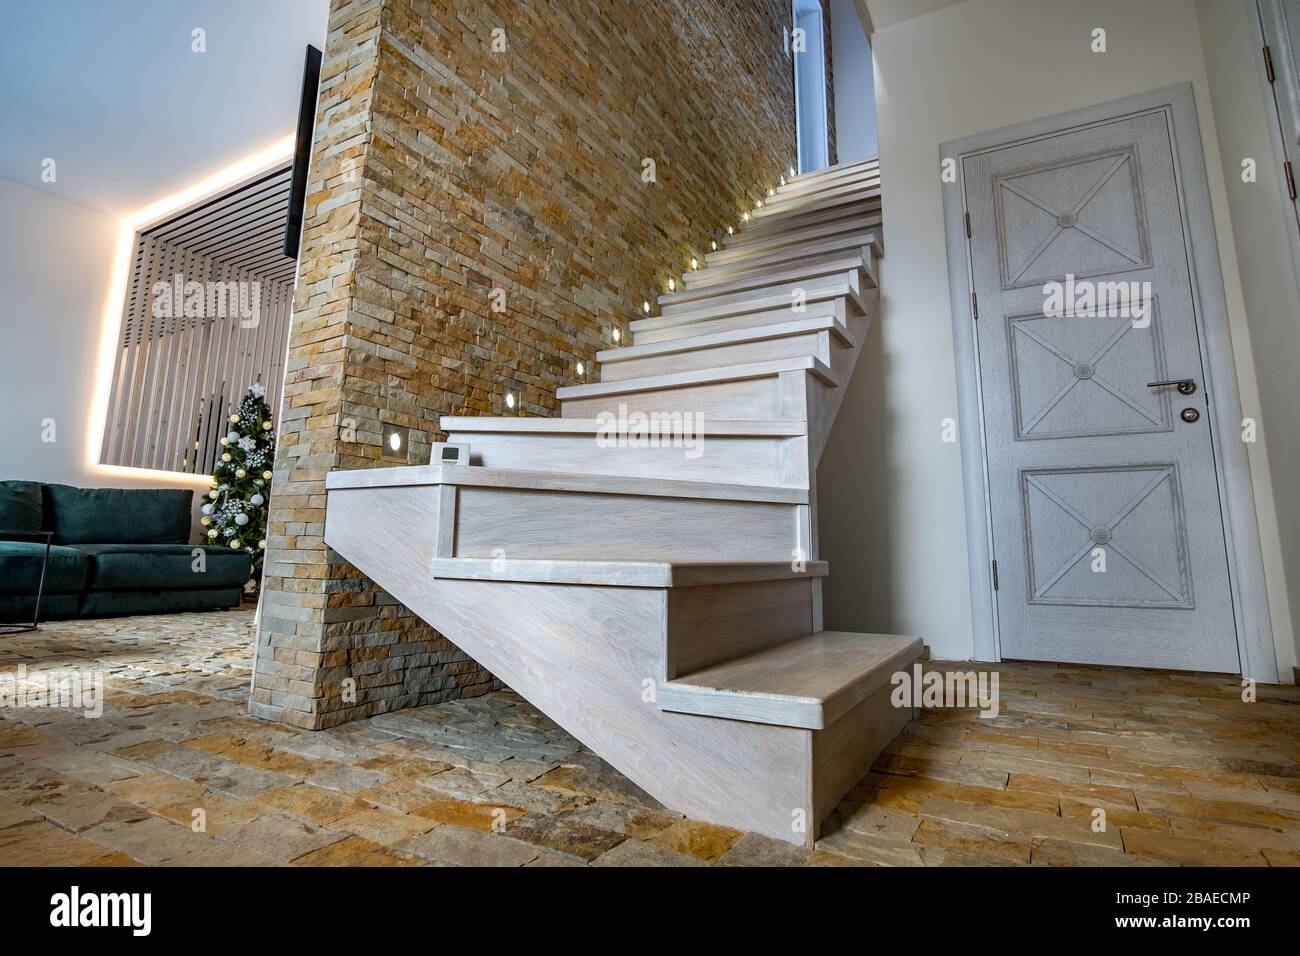 Stylish wooden contemporary staircase inside loft house interior. Modern hallway with decorative limestone brick walls and white oak stairs. Stock Photo